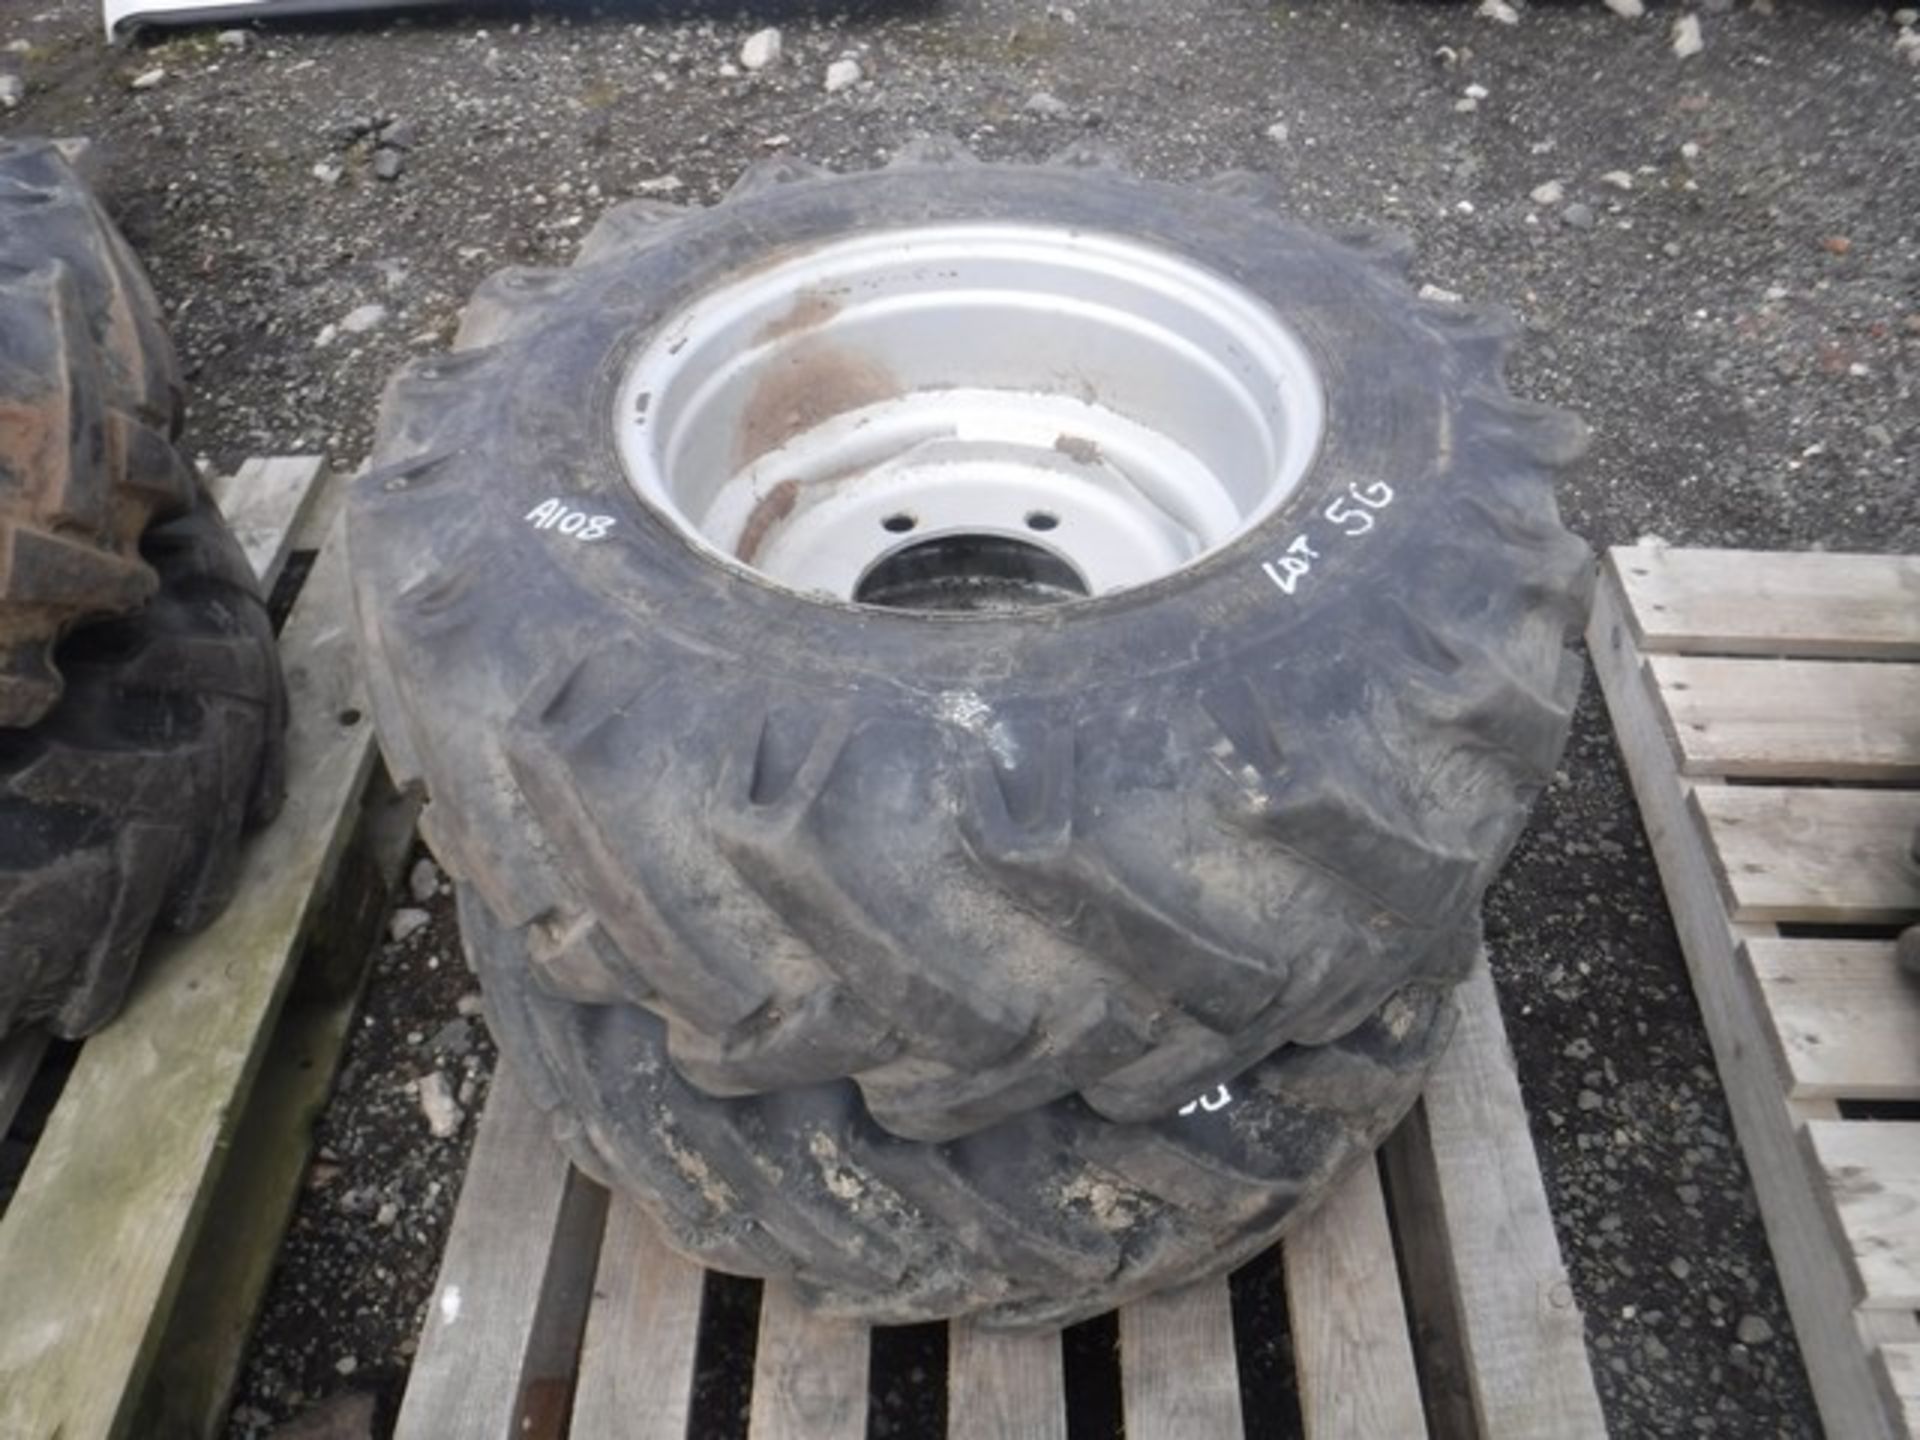 BKT 10.0/75 - 15.3 used tyres and wheels x 2